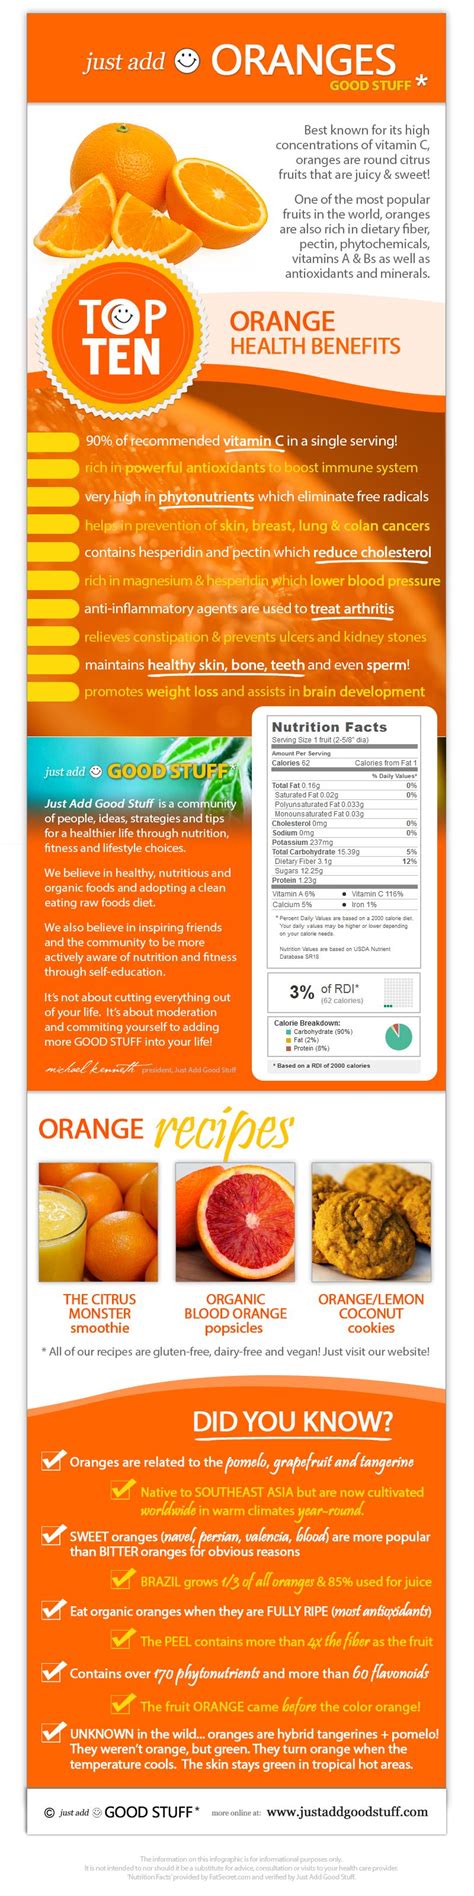 Just Add Good Stuff Oranges Infographic Detailing The Health Benefits